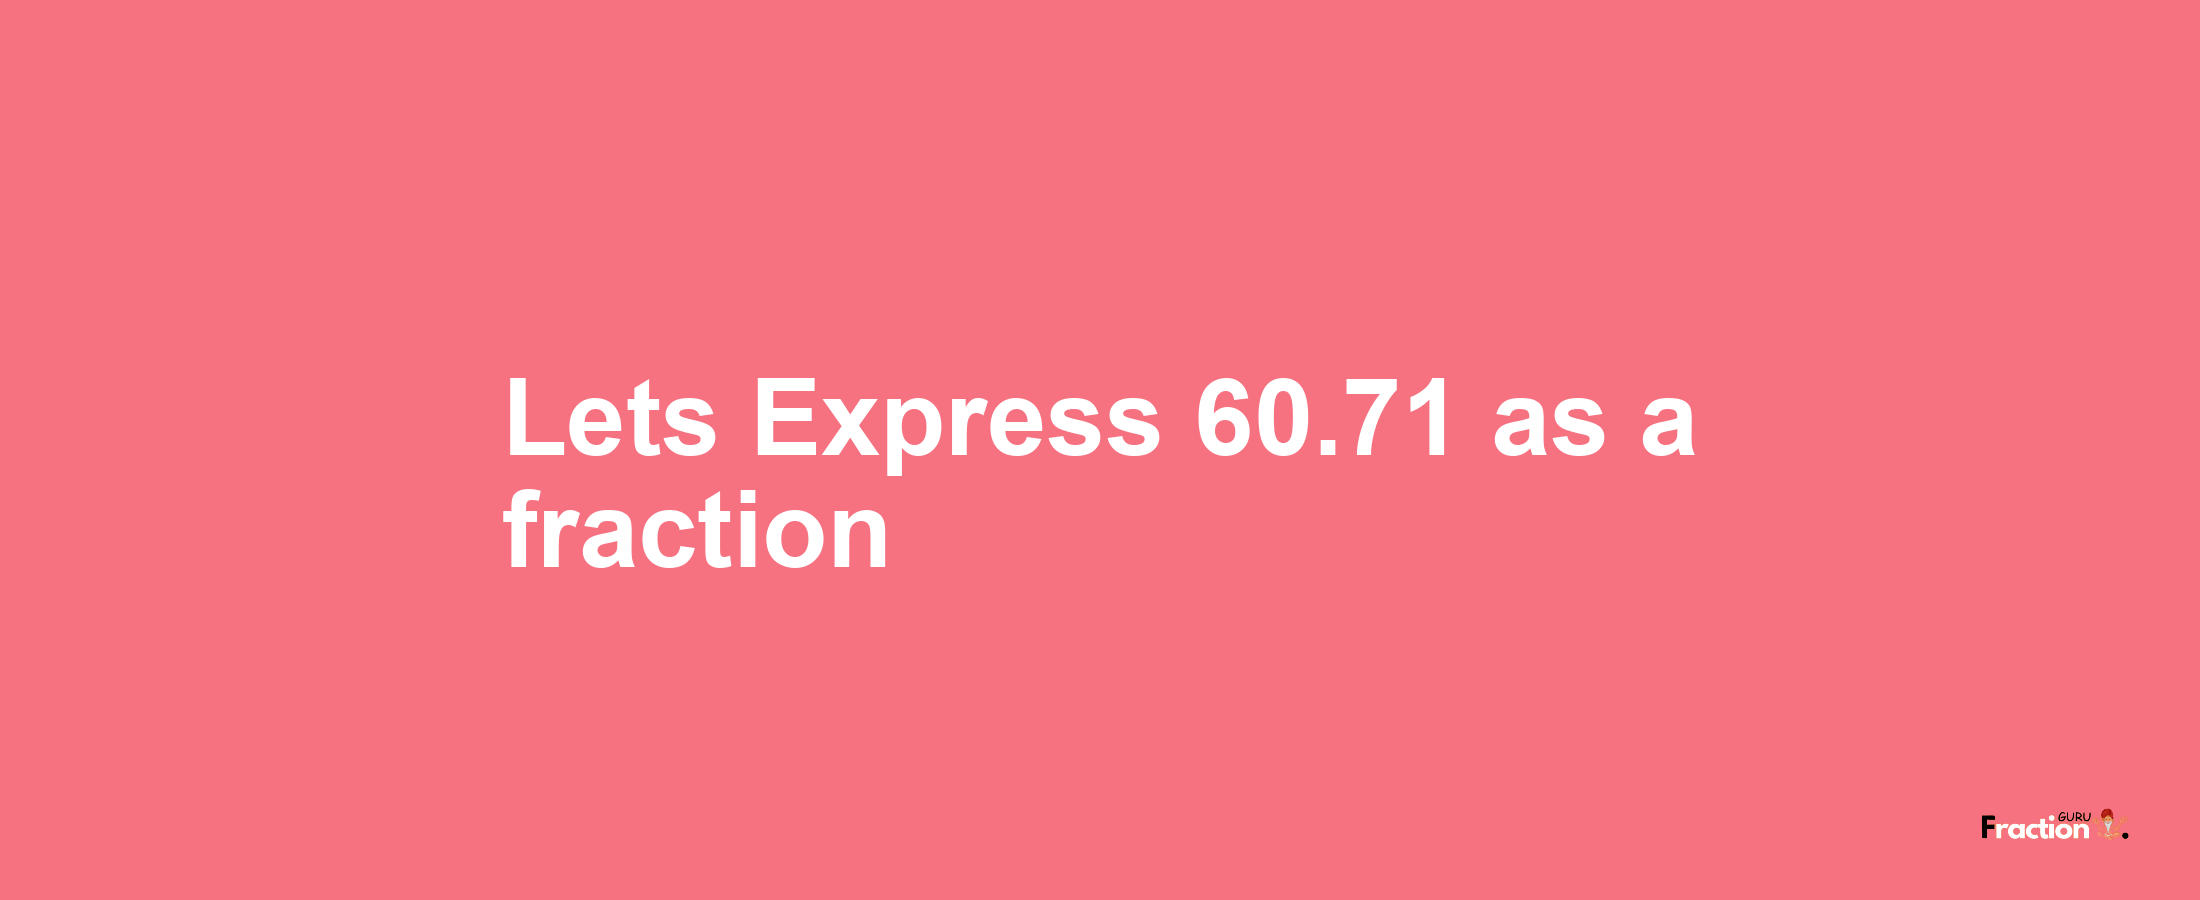 Lets Express 60.71 as afraction